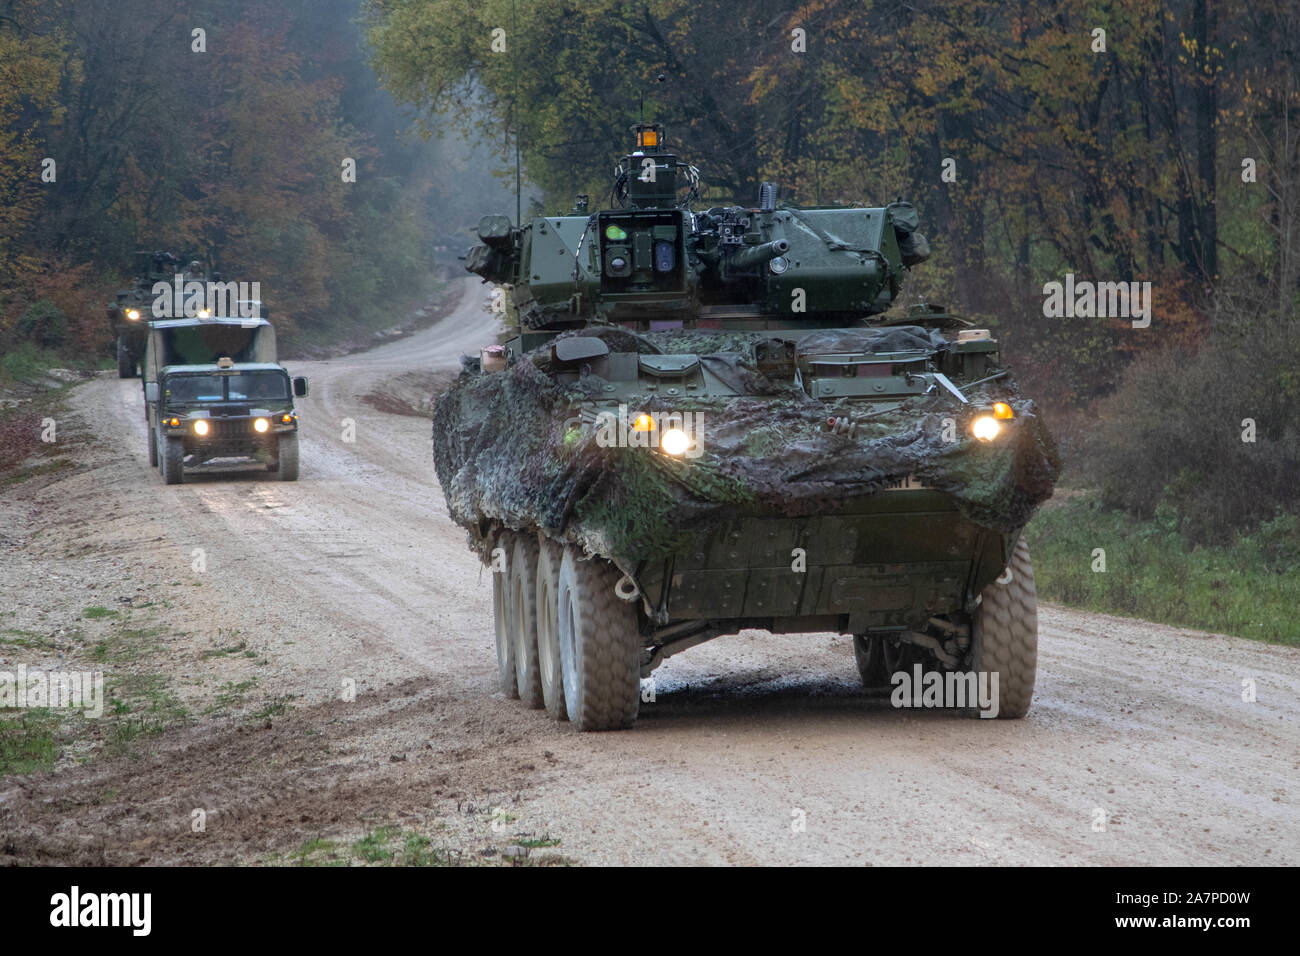 A 30mm Stryker Infantry Carrier Vehicle - Dragoon from Comanche Troop, 1st Squadron, 2d Cavalry Regiment moves to a forward position during Dragoon Ready 20 at the Joint Multinational Readiness Center in Hohenfels, Germany, Nov. 3, 2019. Dragoon Ready is a 7th Army Training Command led exercise designed to ensure readiness and certify 2CR Soldiers in NATO combat readiness and unified land operations. (Photo by Spc. Ethan Valetski, 5th Mobile Public Affairs Detachment) Stock Photo